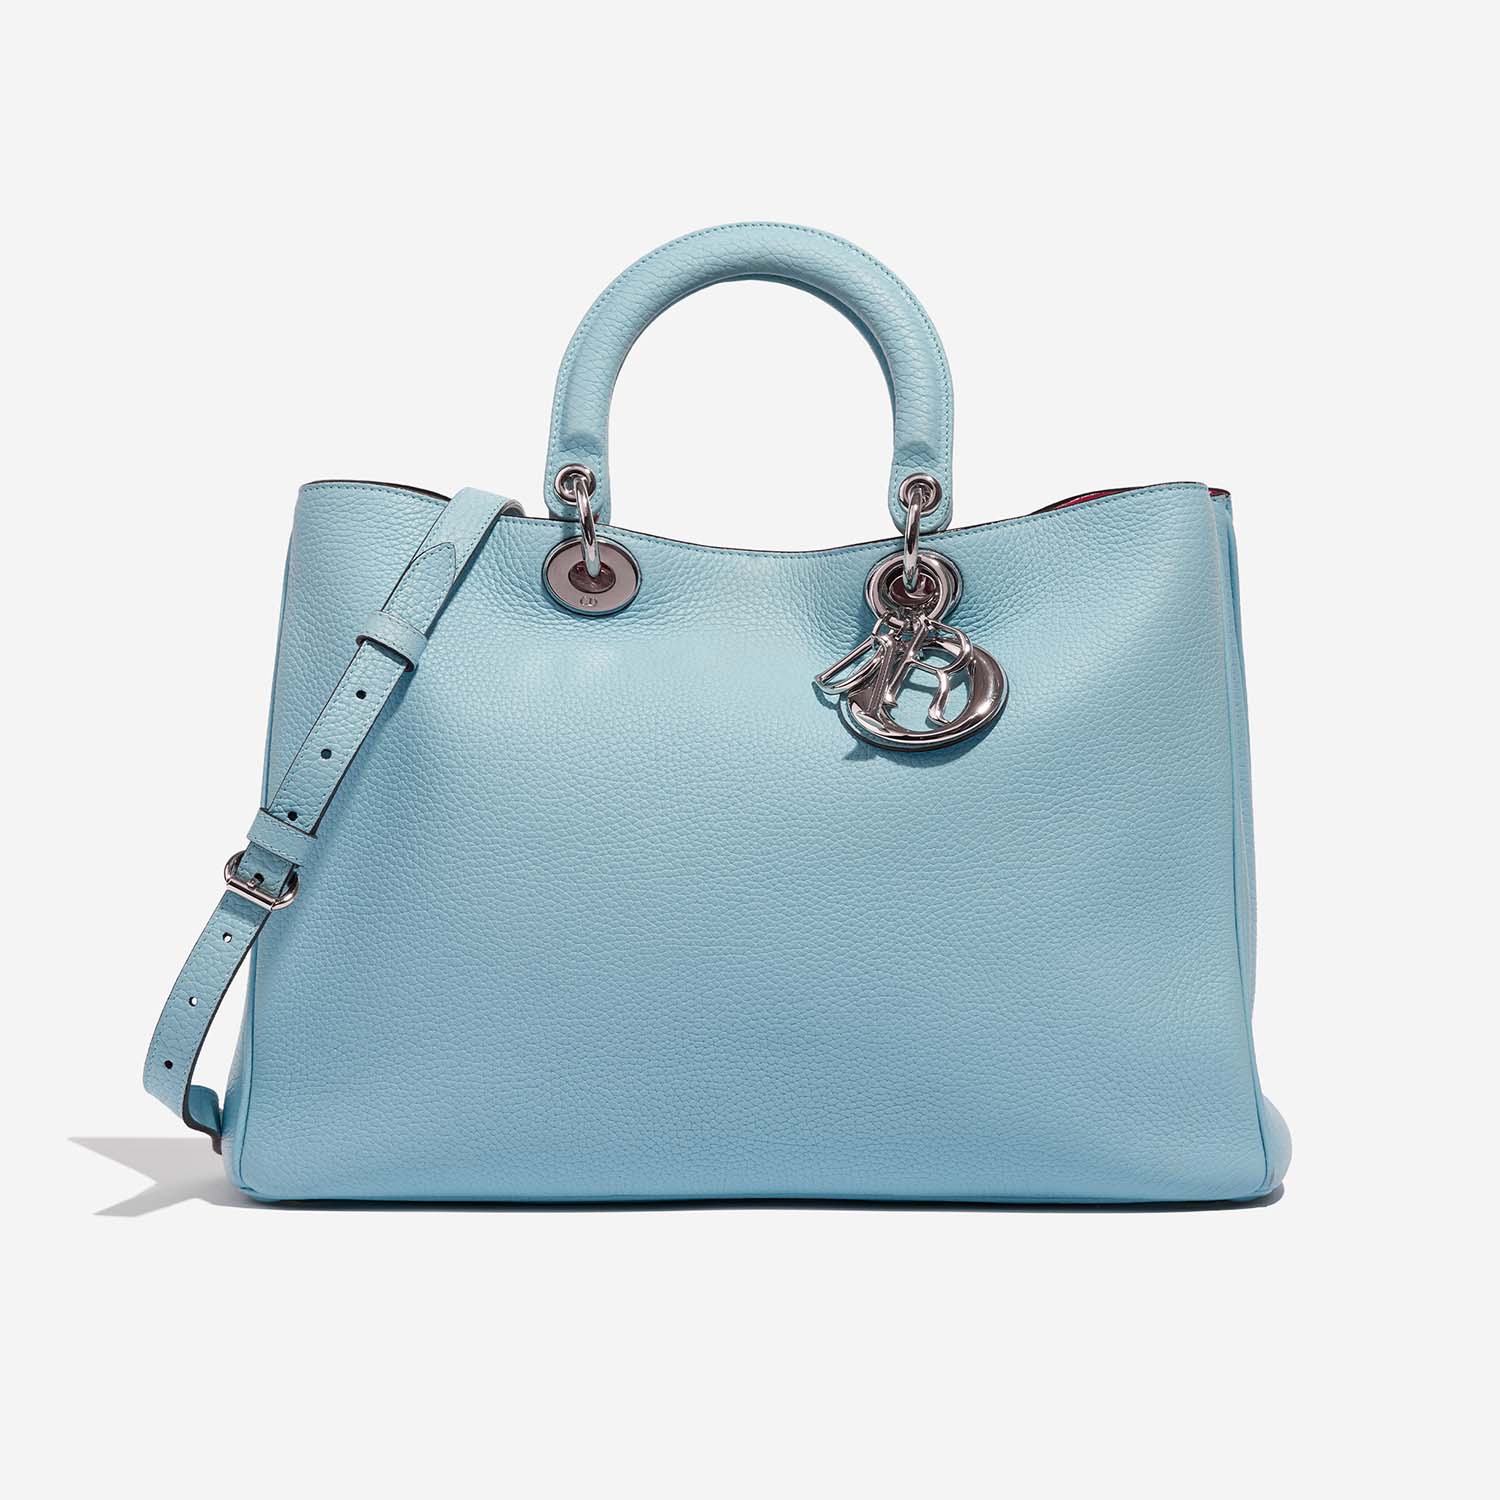 Shop authentic Christian Dior Diorissimo Large Tote at revogue for just USD  120000